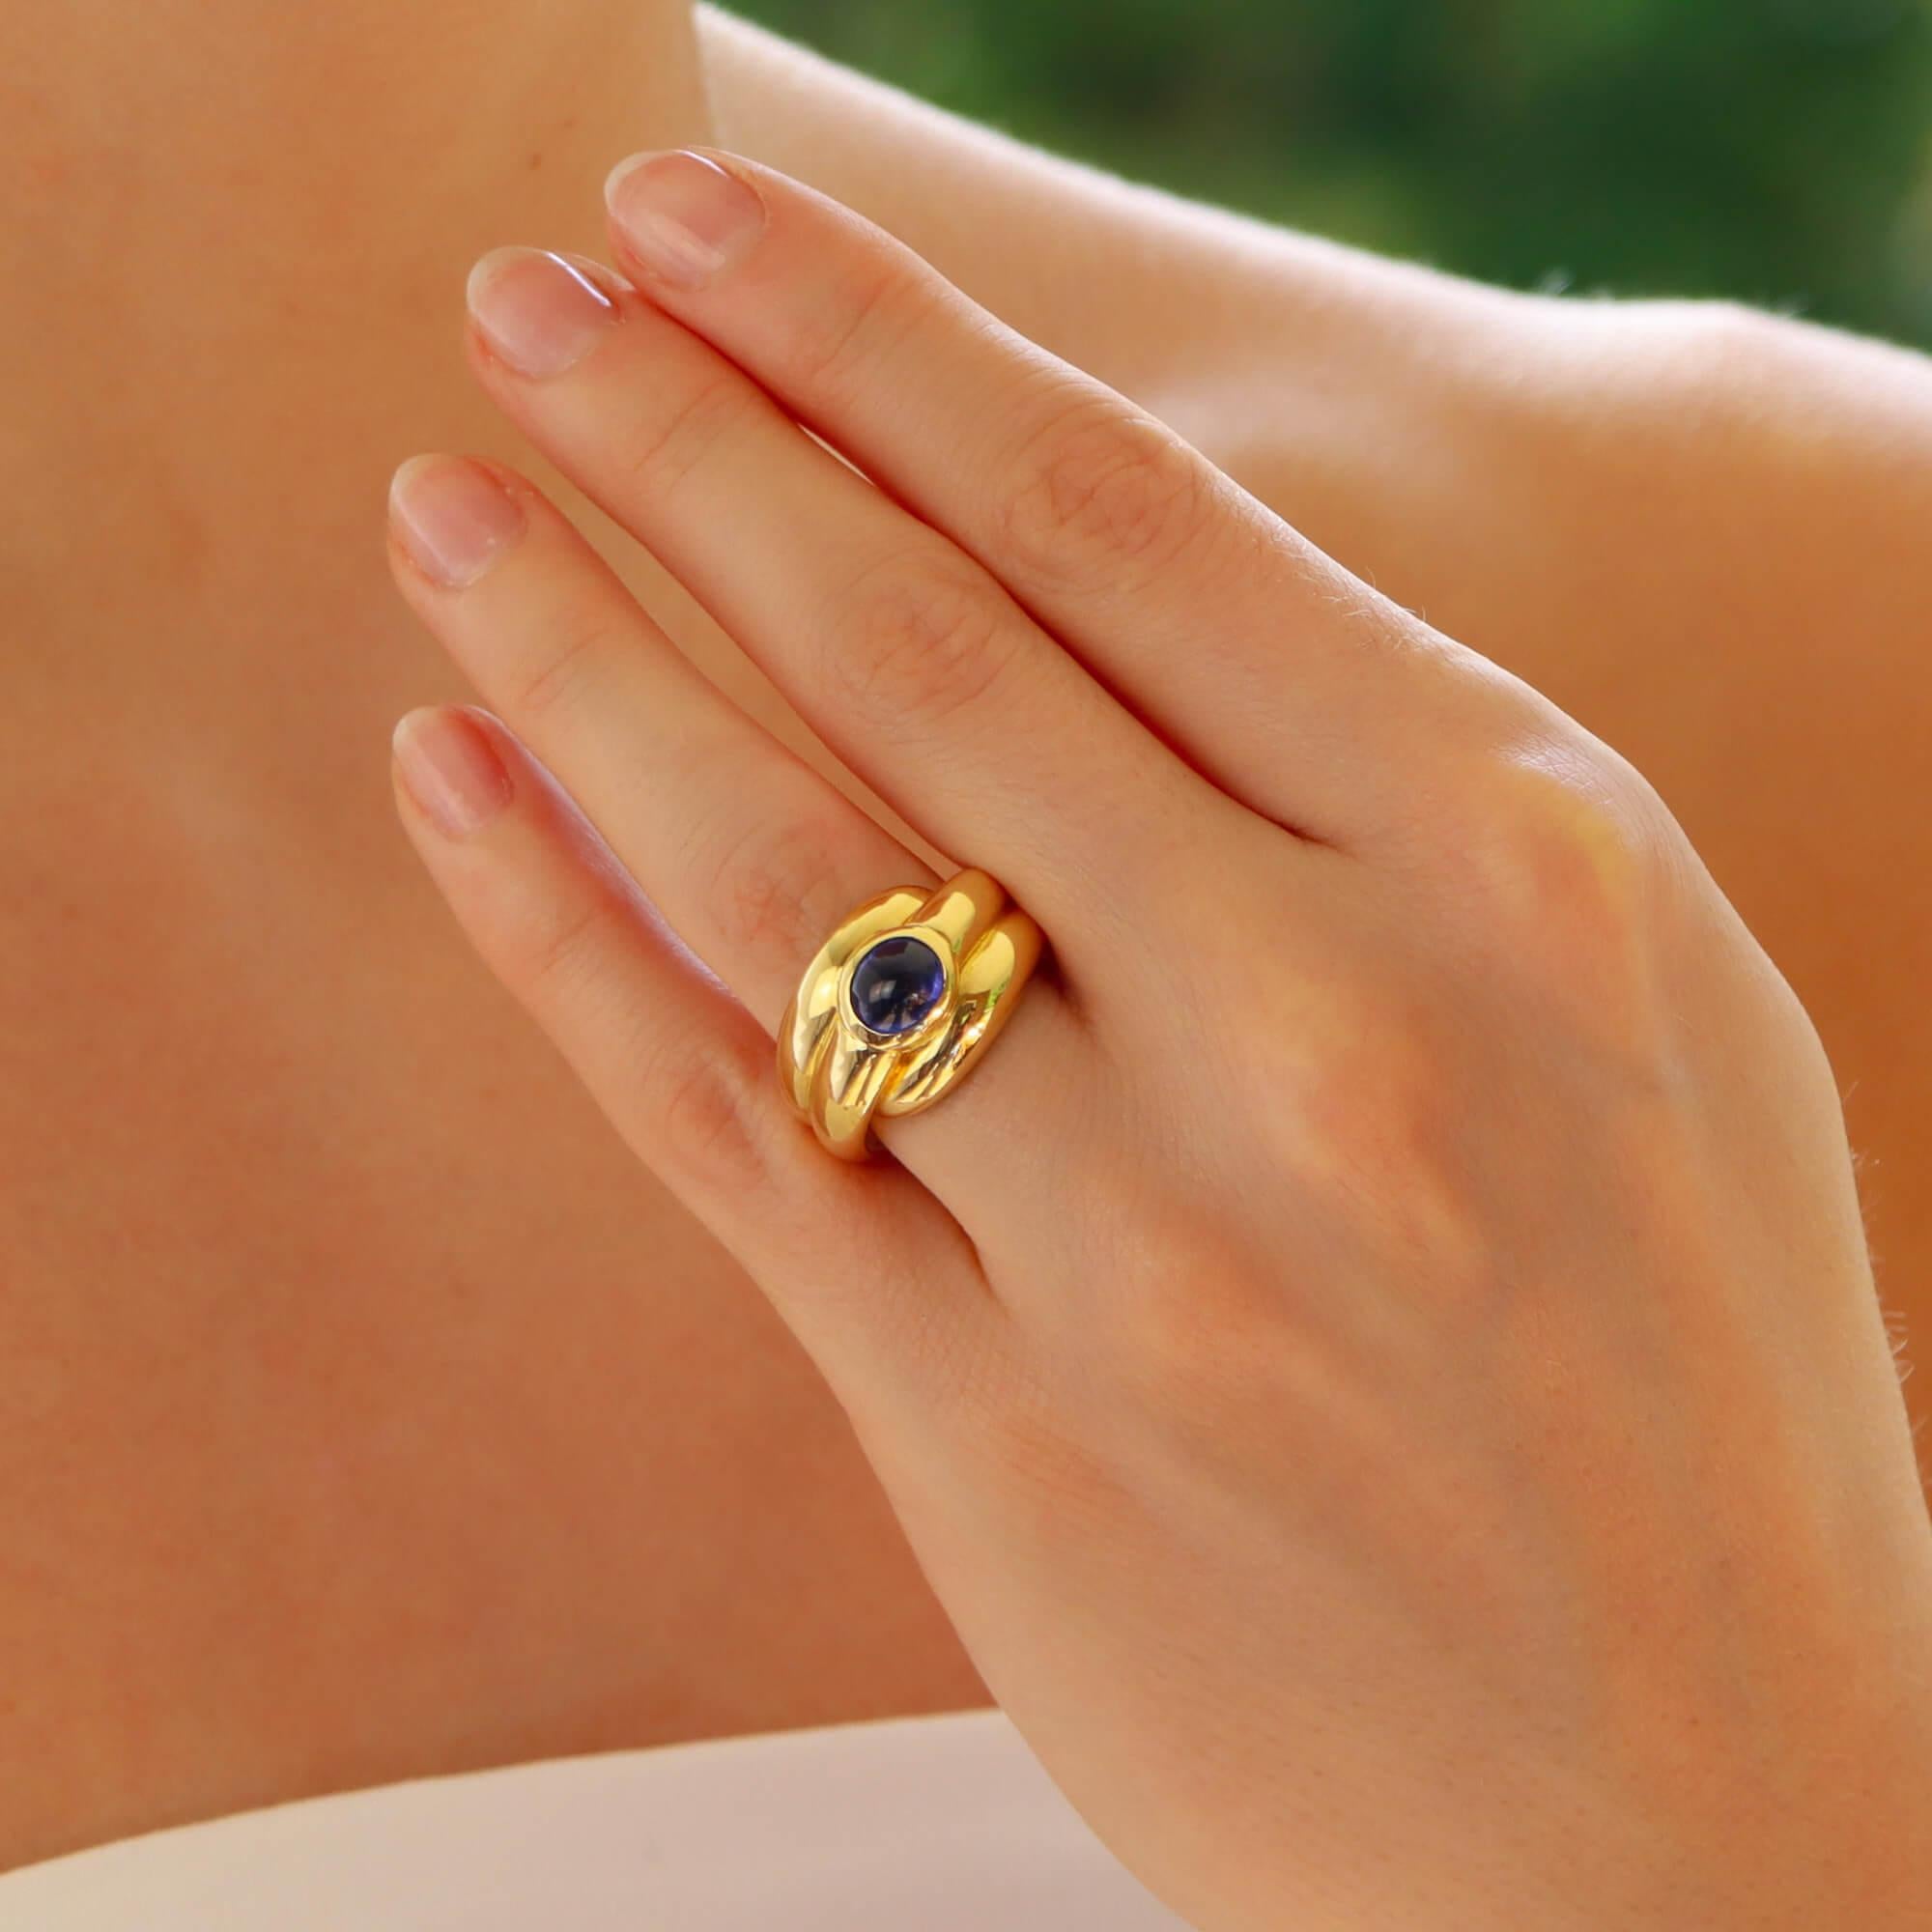 A beautiful vintage French sapphire bombé ring set in 18k yellow gold.

The ring is designed in a raised fluted bombé design and is centrally set with a rub over set oval cabochon sapphire.

Due to the design, this piece stands out beautifully on